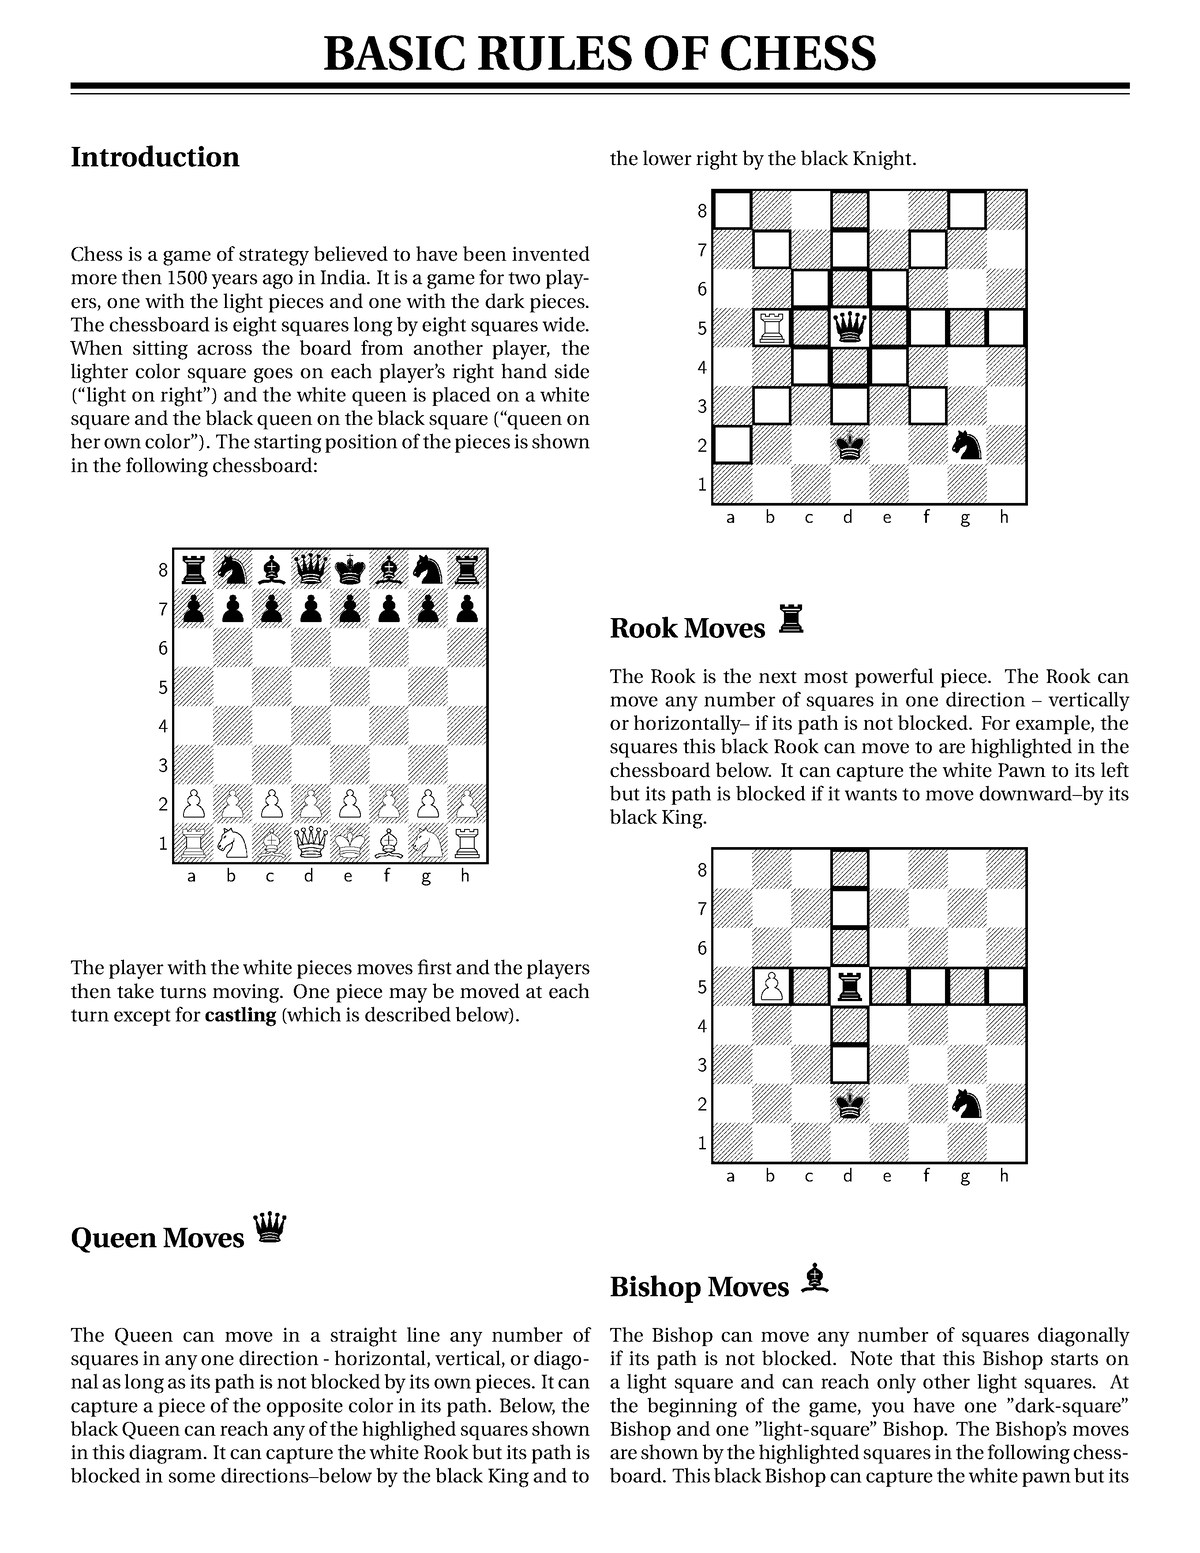 What are some basic rules in chess for absolute beginners? - Quora